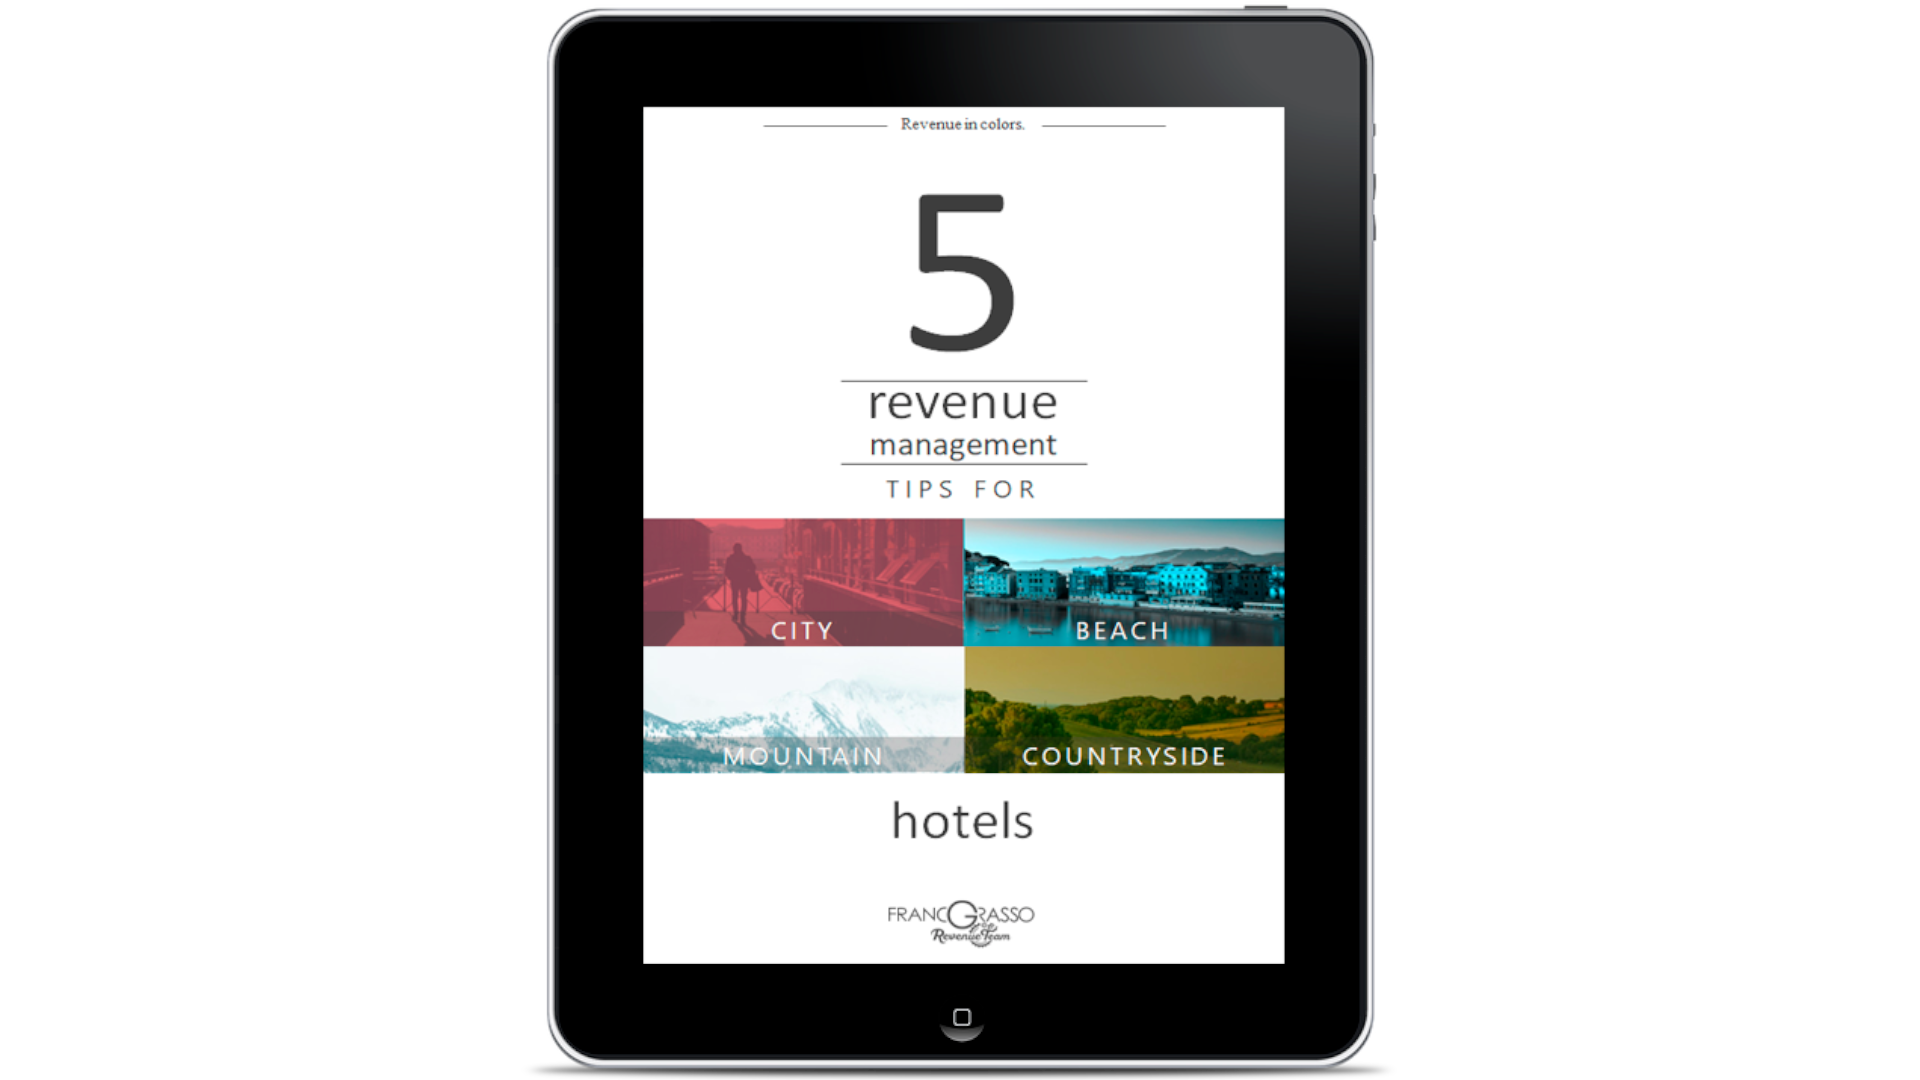 5 Revenue Management Tips for City, Beach, Mountain & Countryside Hotels fgrt guide thumbnail